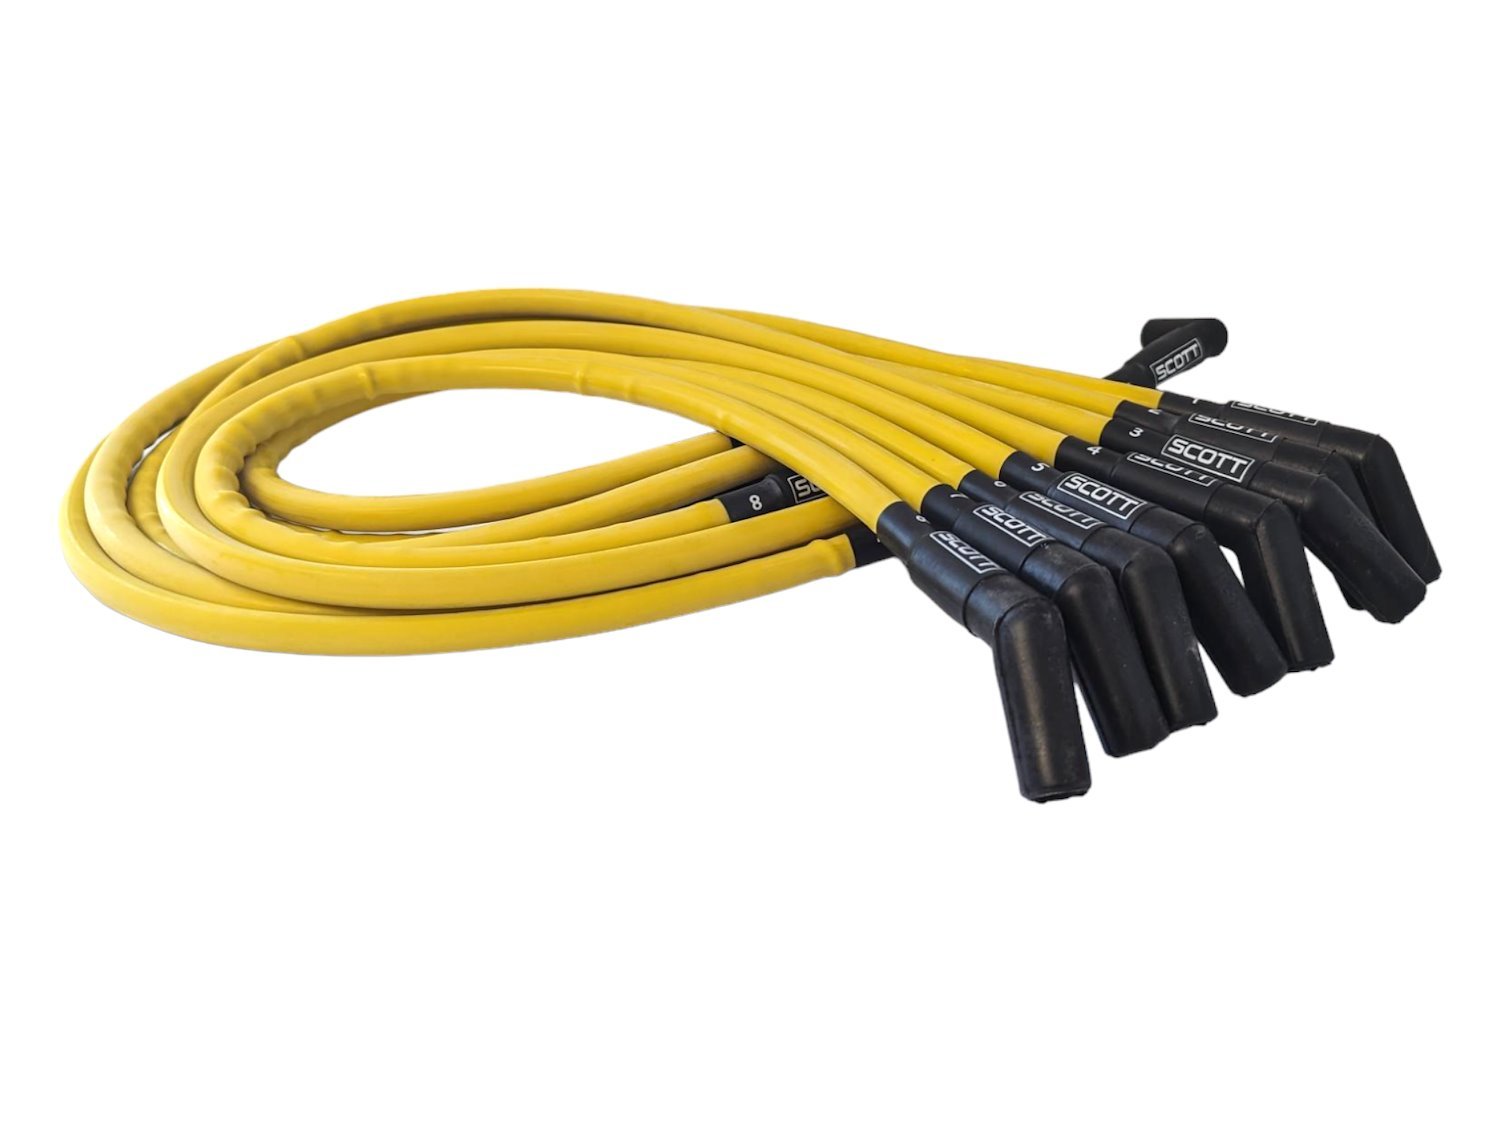 SPW-CH-426-7 High-Performance Silicone-Sleeved Spark Plug Wire Set for Small Block Ford, Over Valve Cover [Yellow]